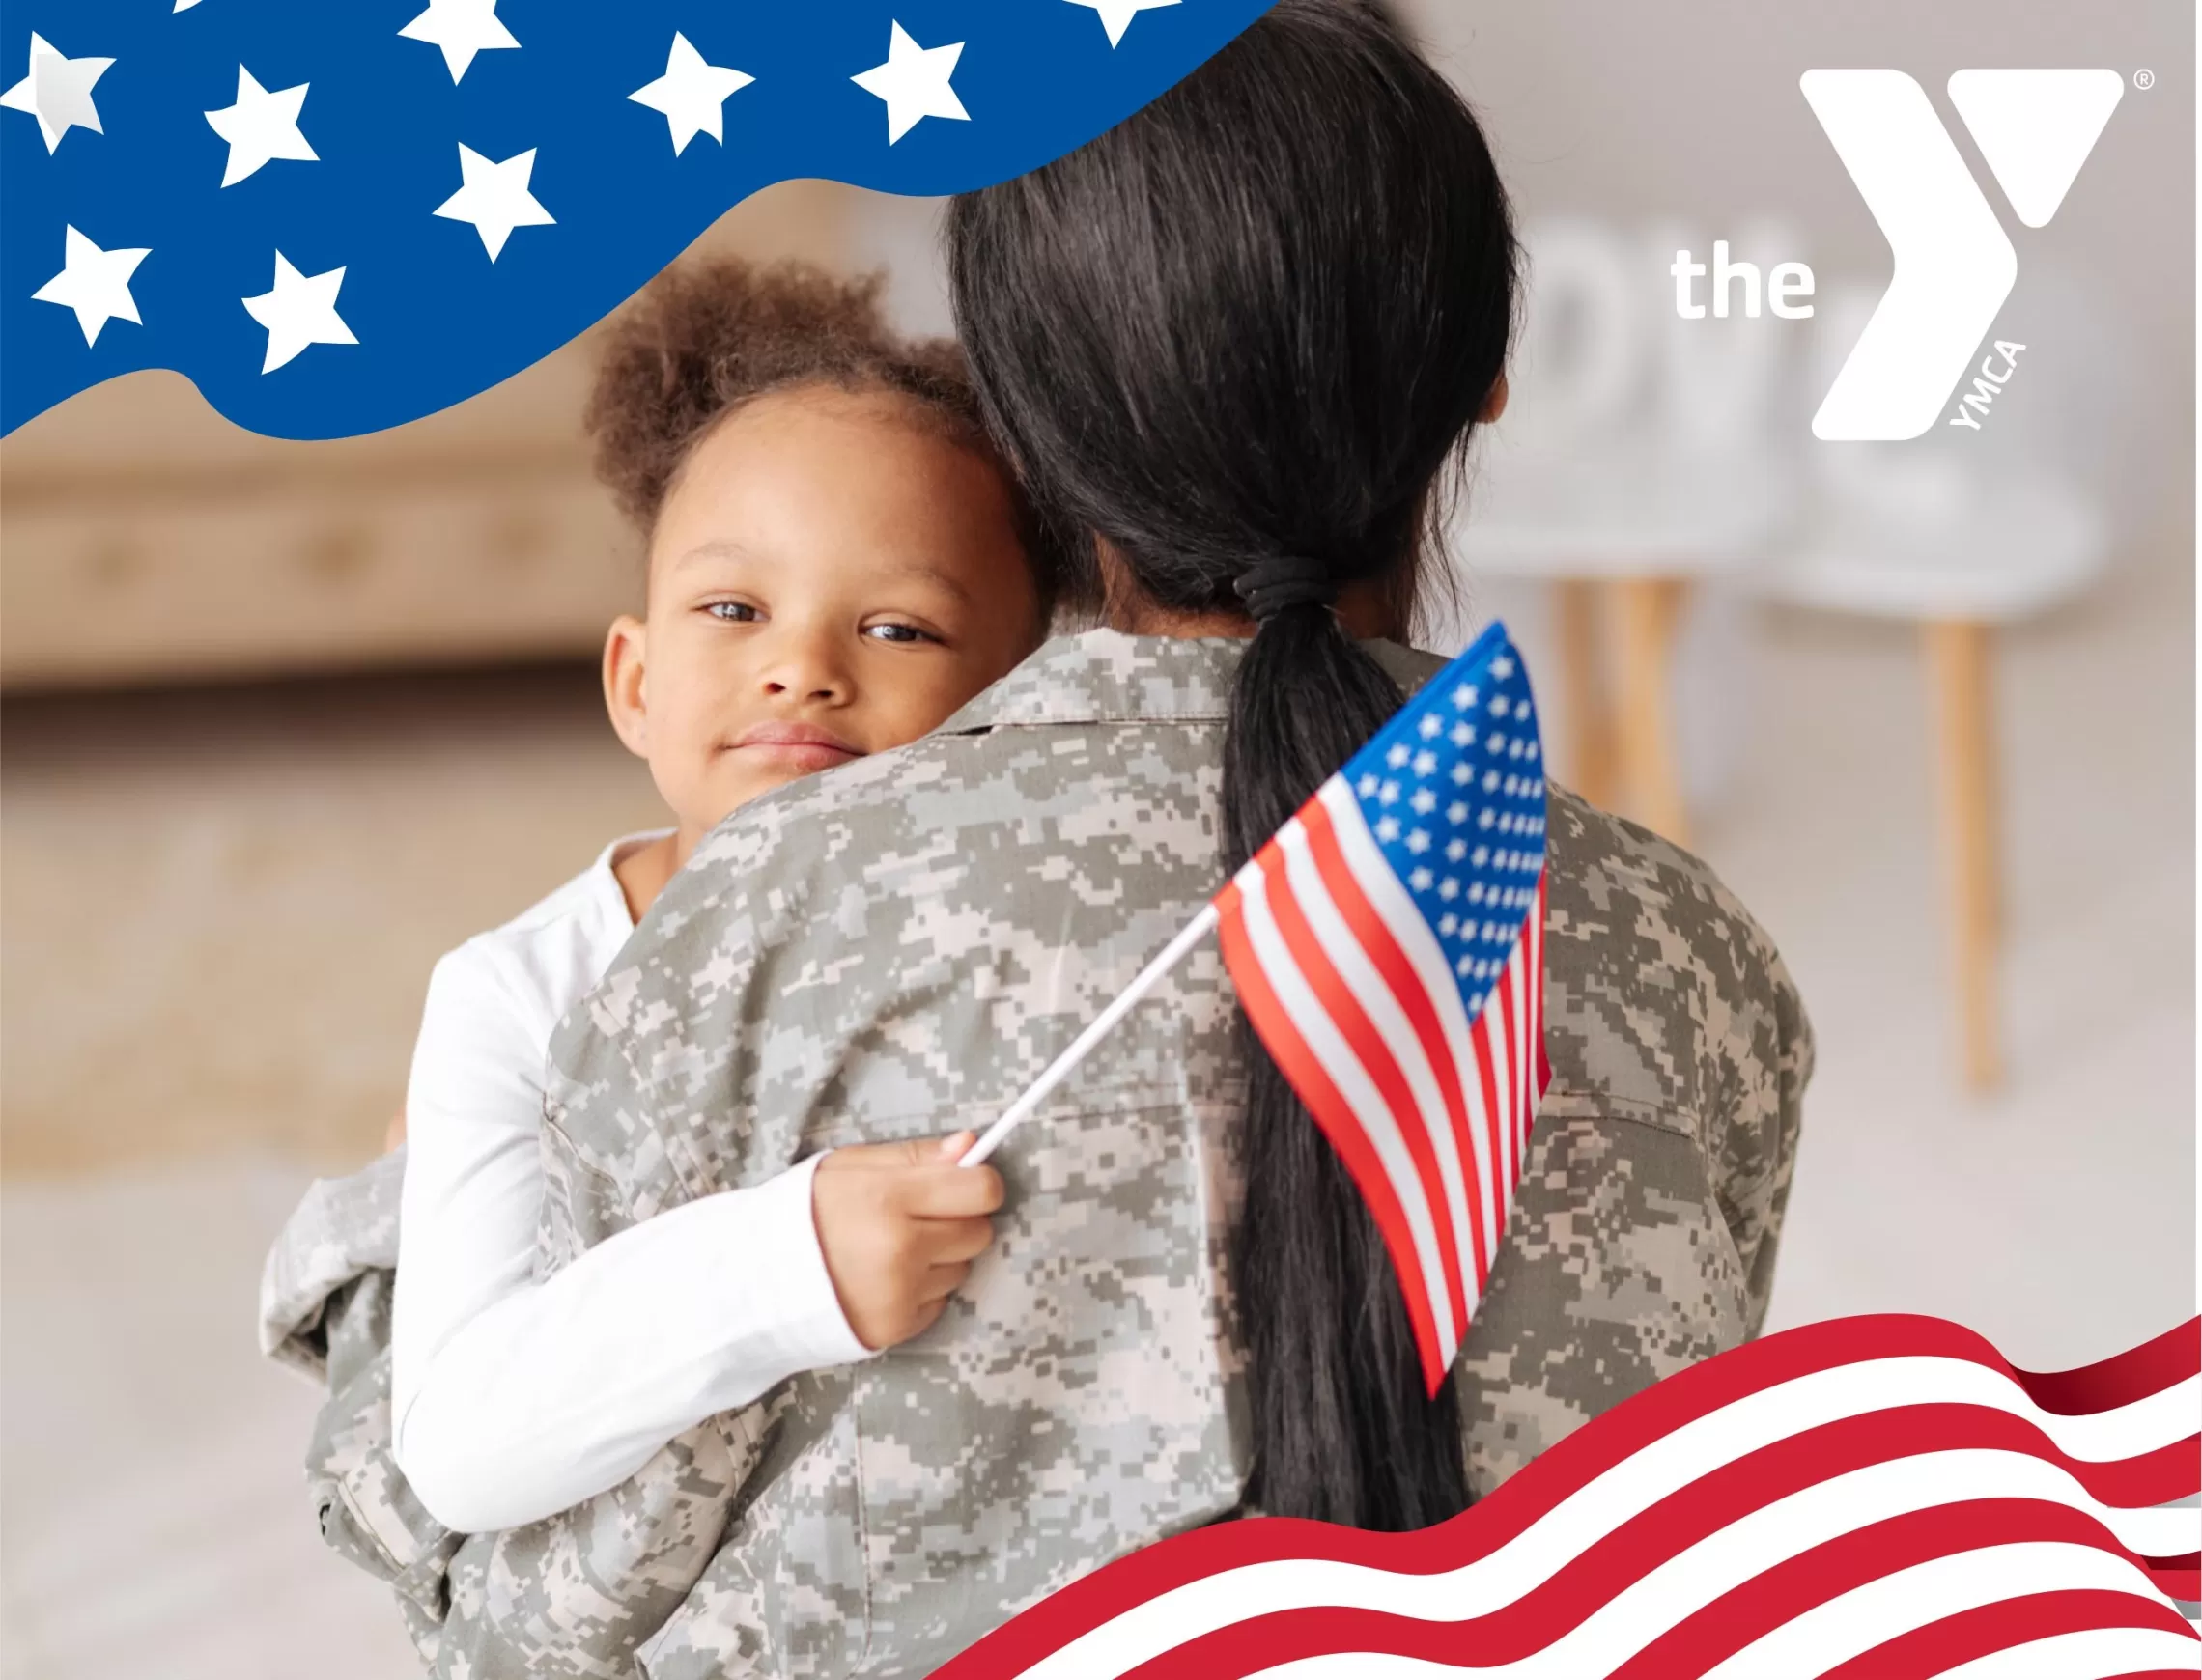 U.S Armed Forces Membership at the Y